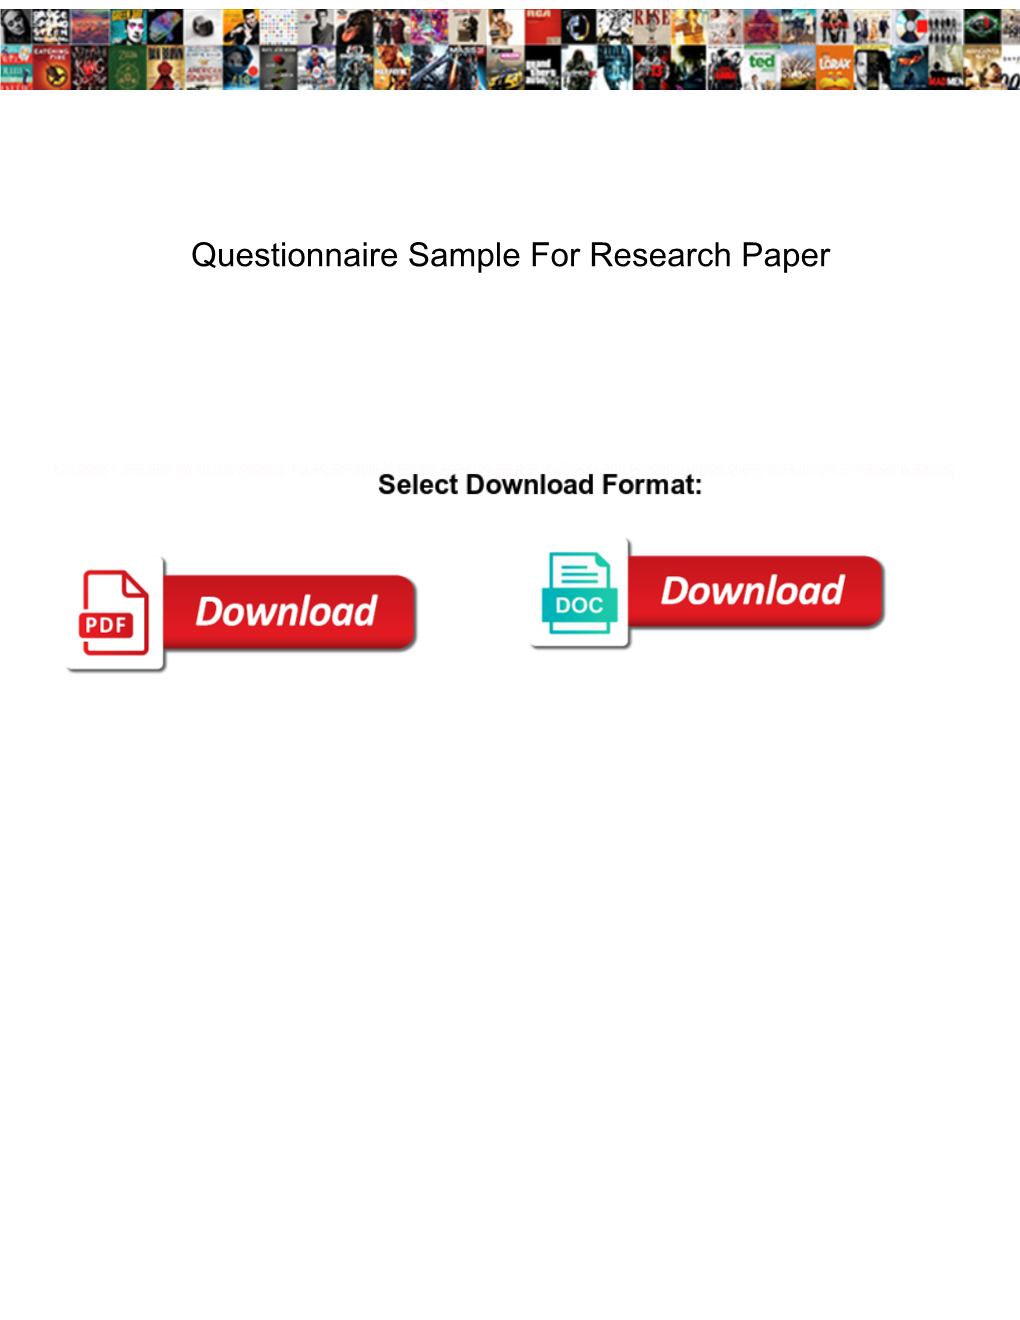 Questionnaire Sample for Research Paper